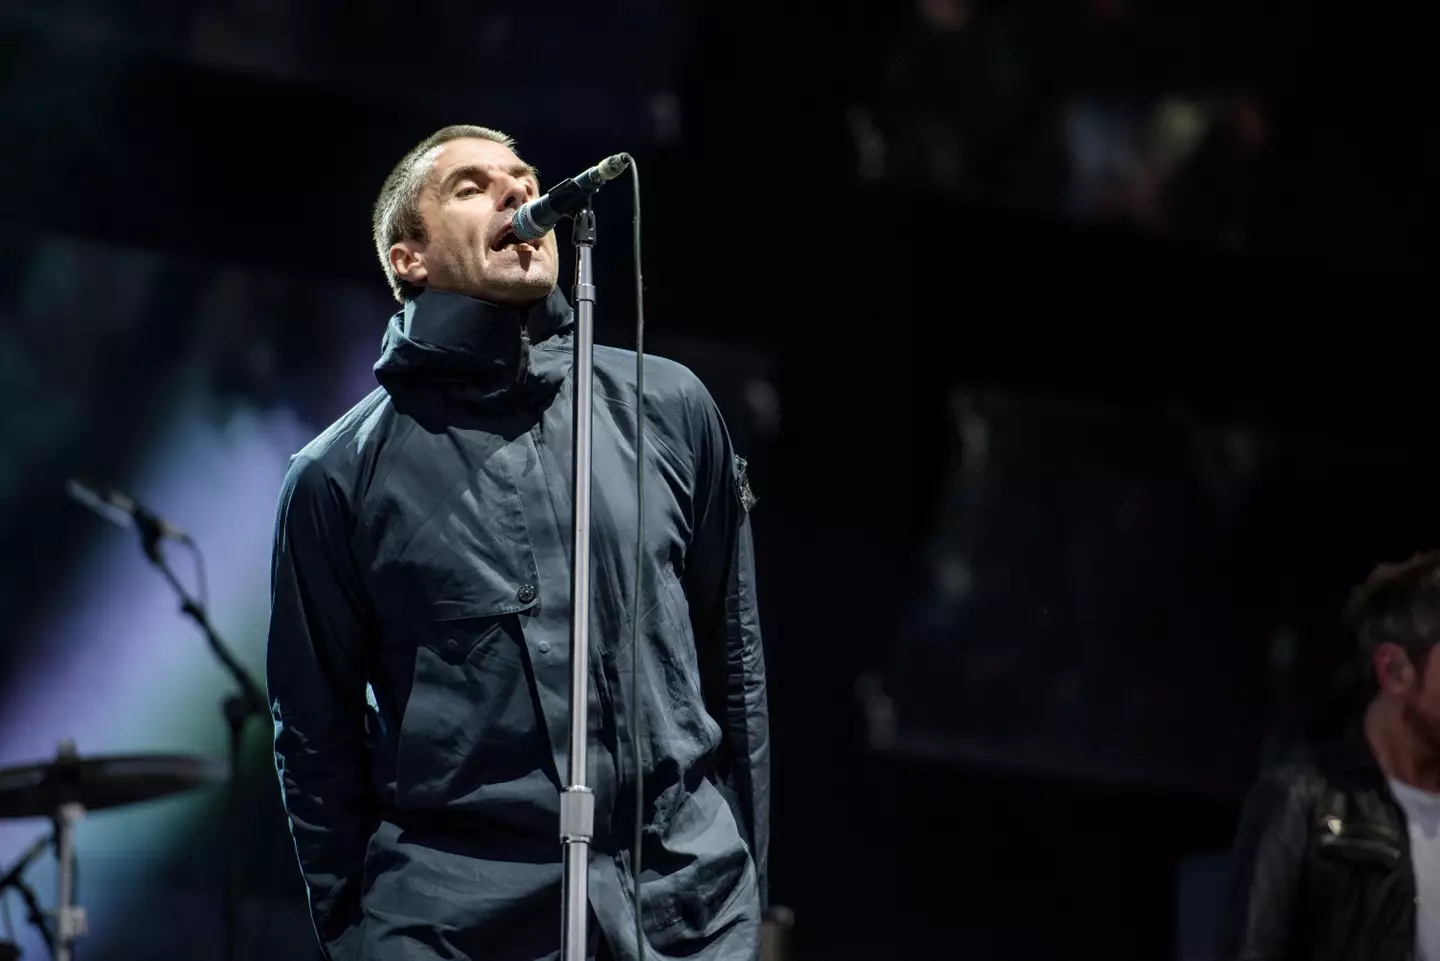 Liam Gallagher updated fans on his health after having surgery.